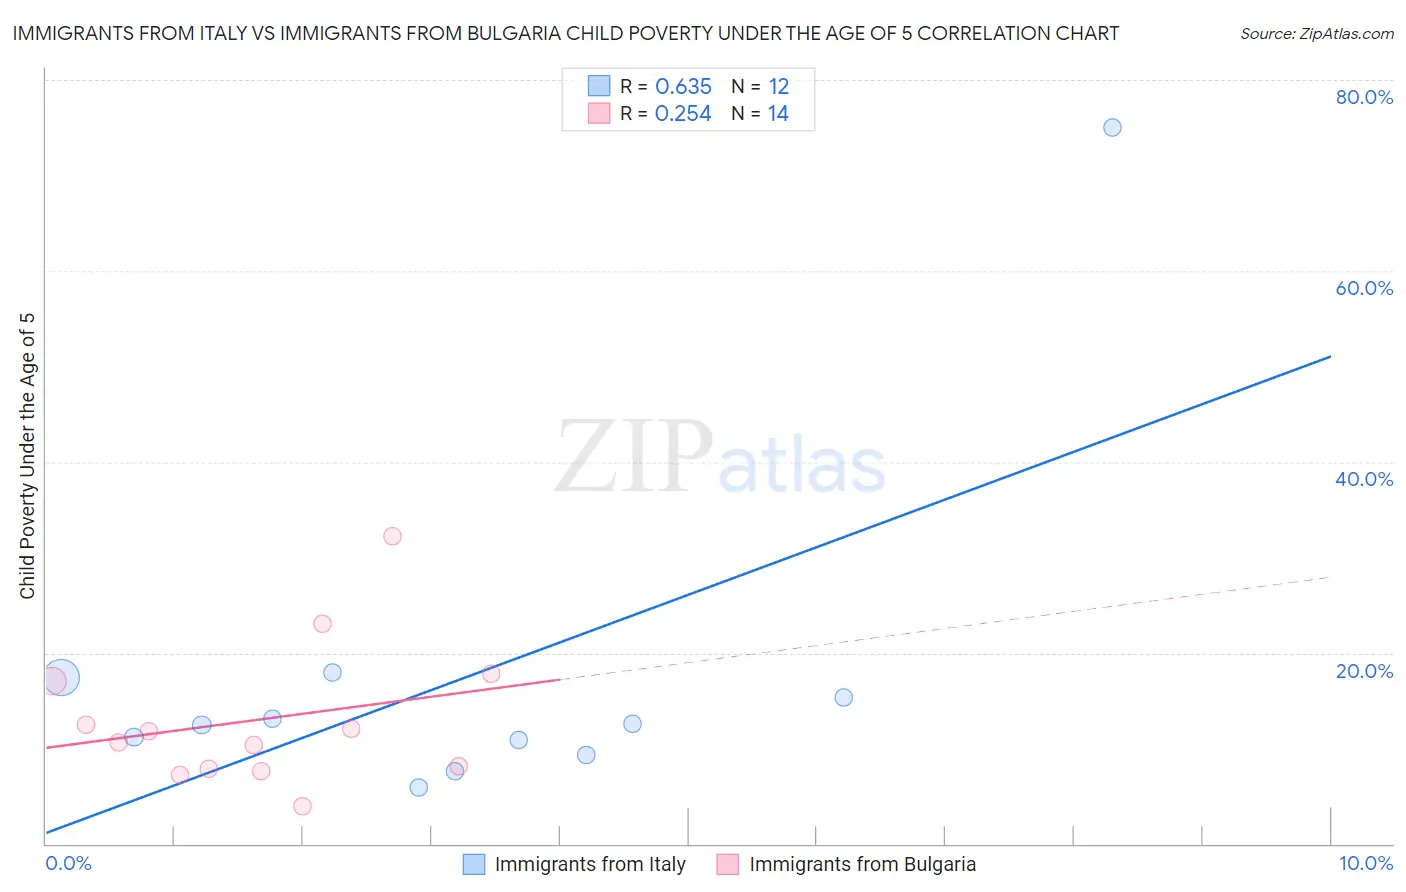 Immigrants from Italy vs Immigrants from Bulgaria Child Poverty Under the Age of 5